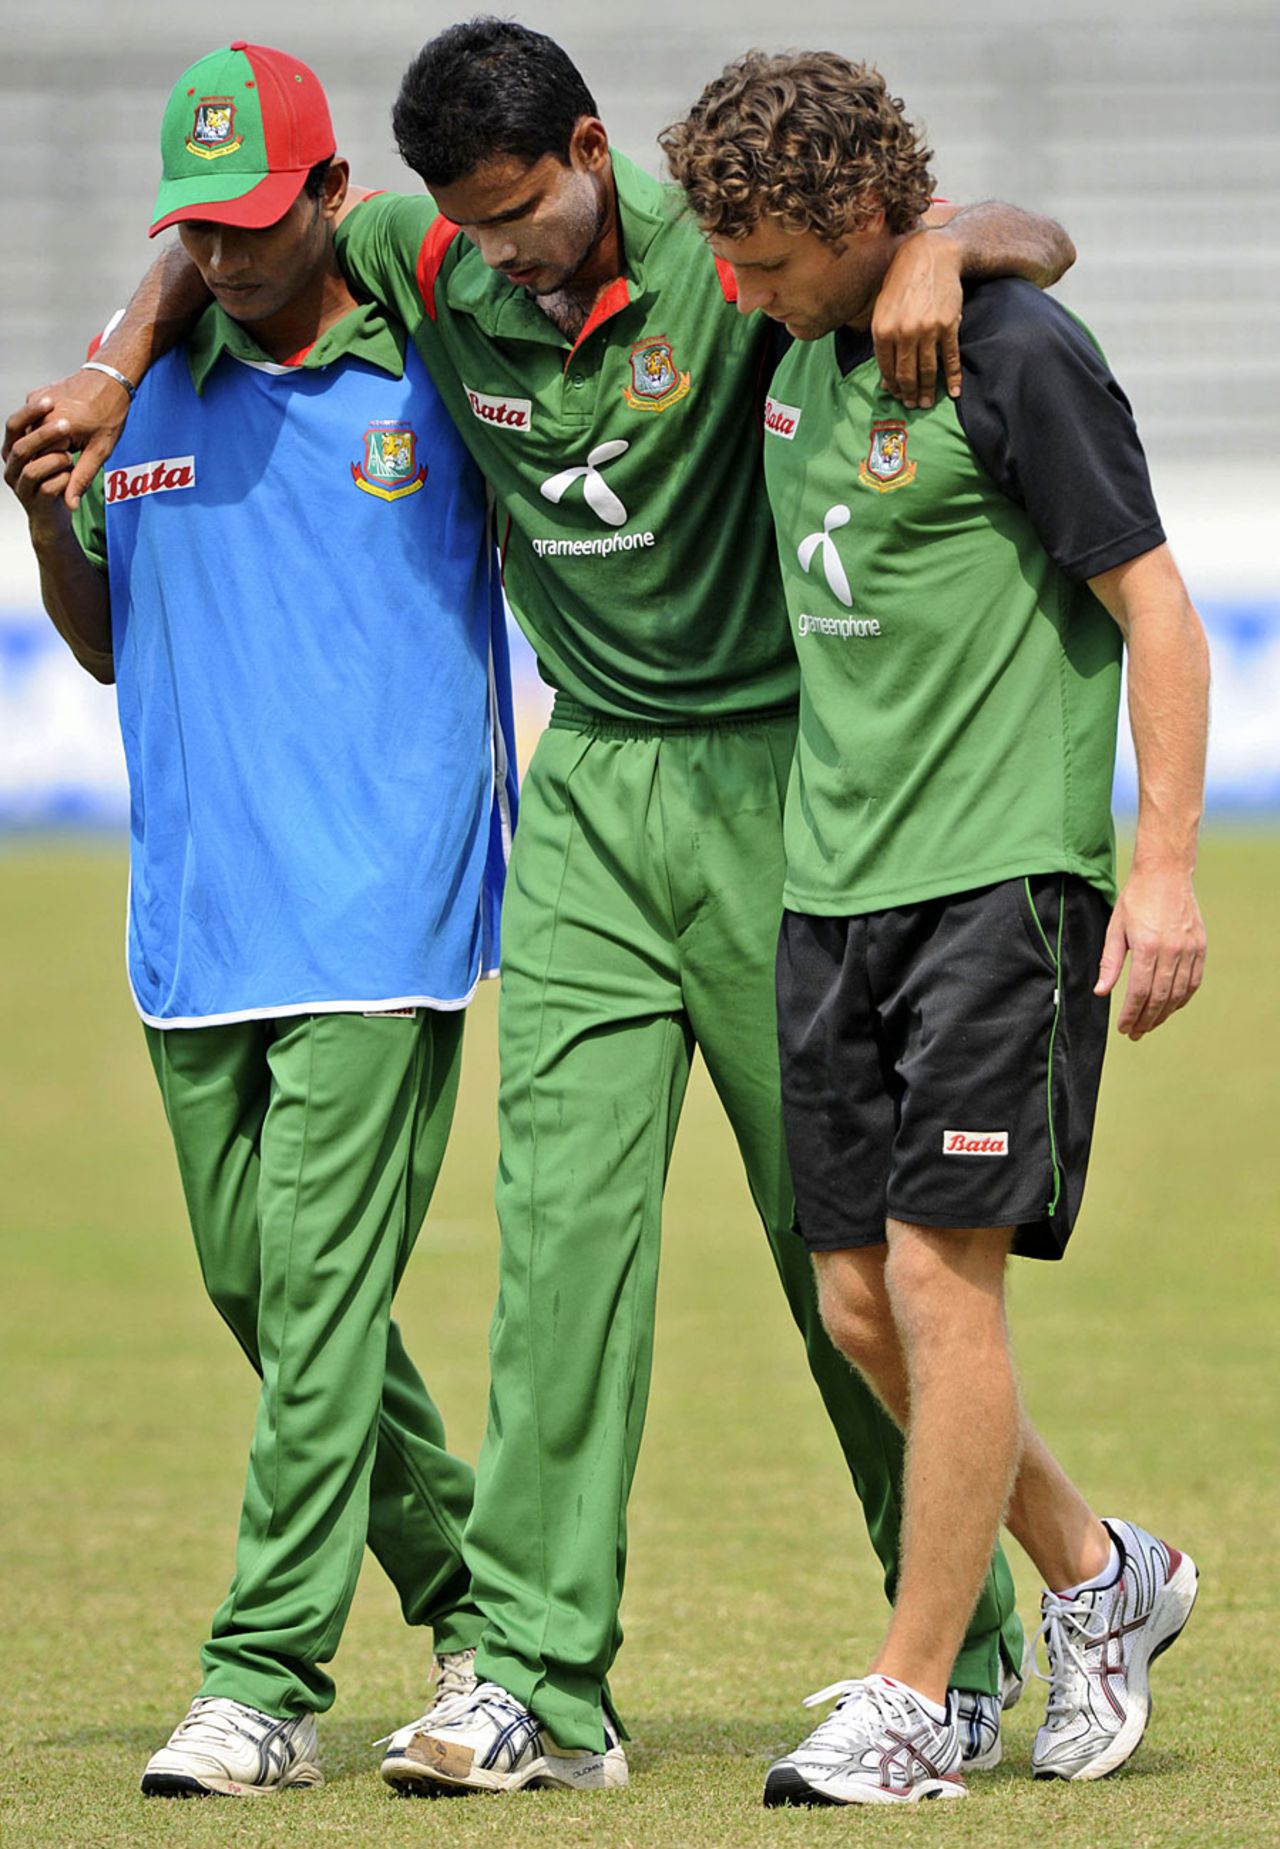 Mashrafe Mortaza was helped off the field after he injured himself during New Zealand's innings, Bangladesh v New Zealand, 1st ODI, Mirpur, October 5, 2010